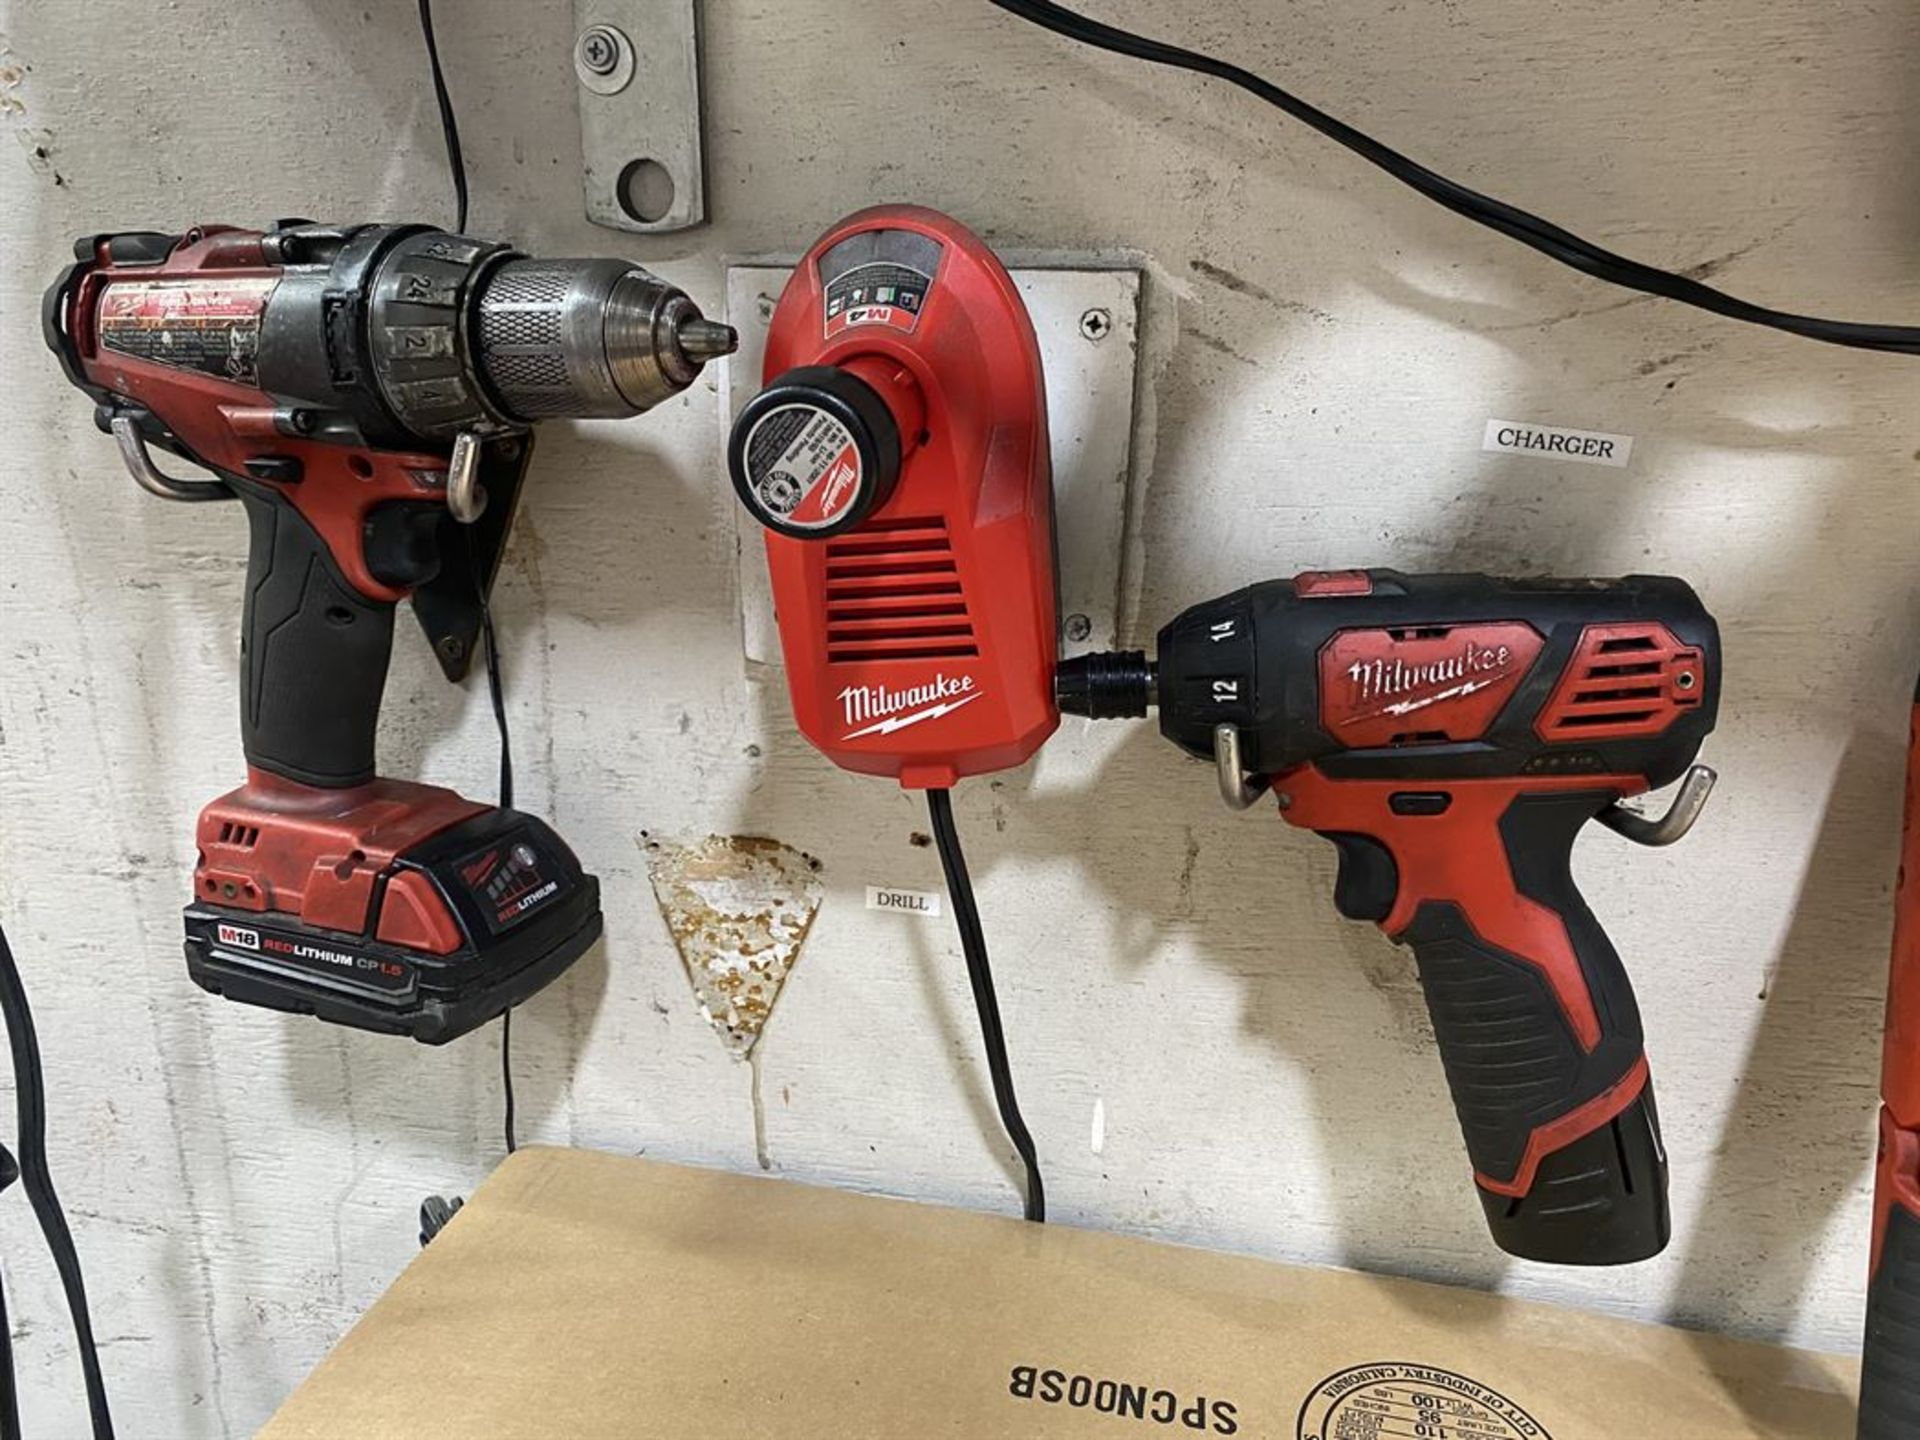 Lot Comprising Milwaukee 18V Drill Driver, 12V Screw Gun, (2) 12V Screw Driver w/ (3) Charger and - Image 2 of 4